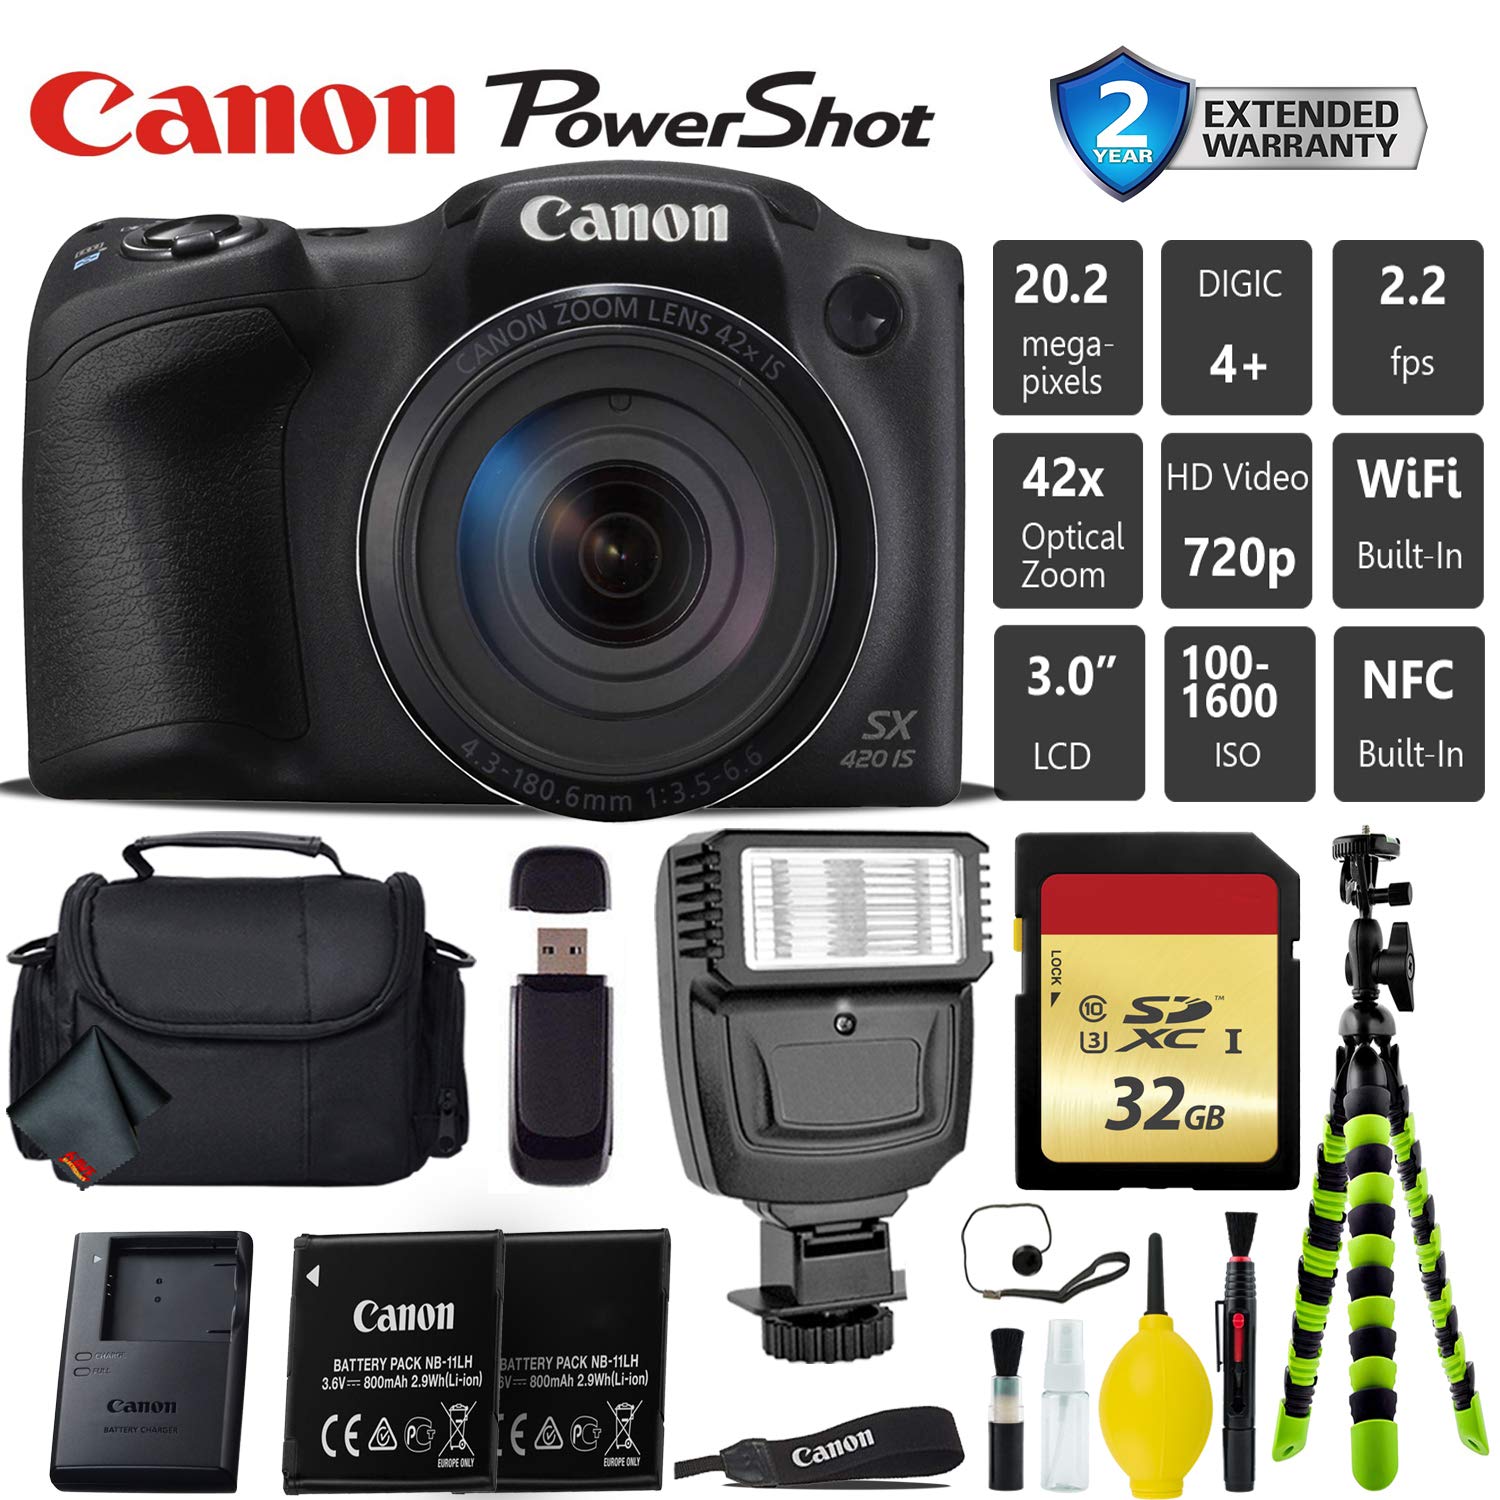 Canon PowerShot SX420 is Digital Point and Shoot Camera + Extra Battery + Digital Flash + Camera Case + 32GB Class 10 Memory Card + 2 Year Extended Warranty (Total of 3YR) - Intl Model - image 1 of 5